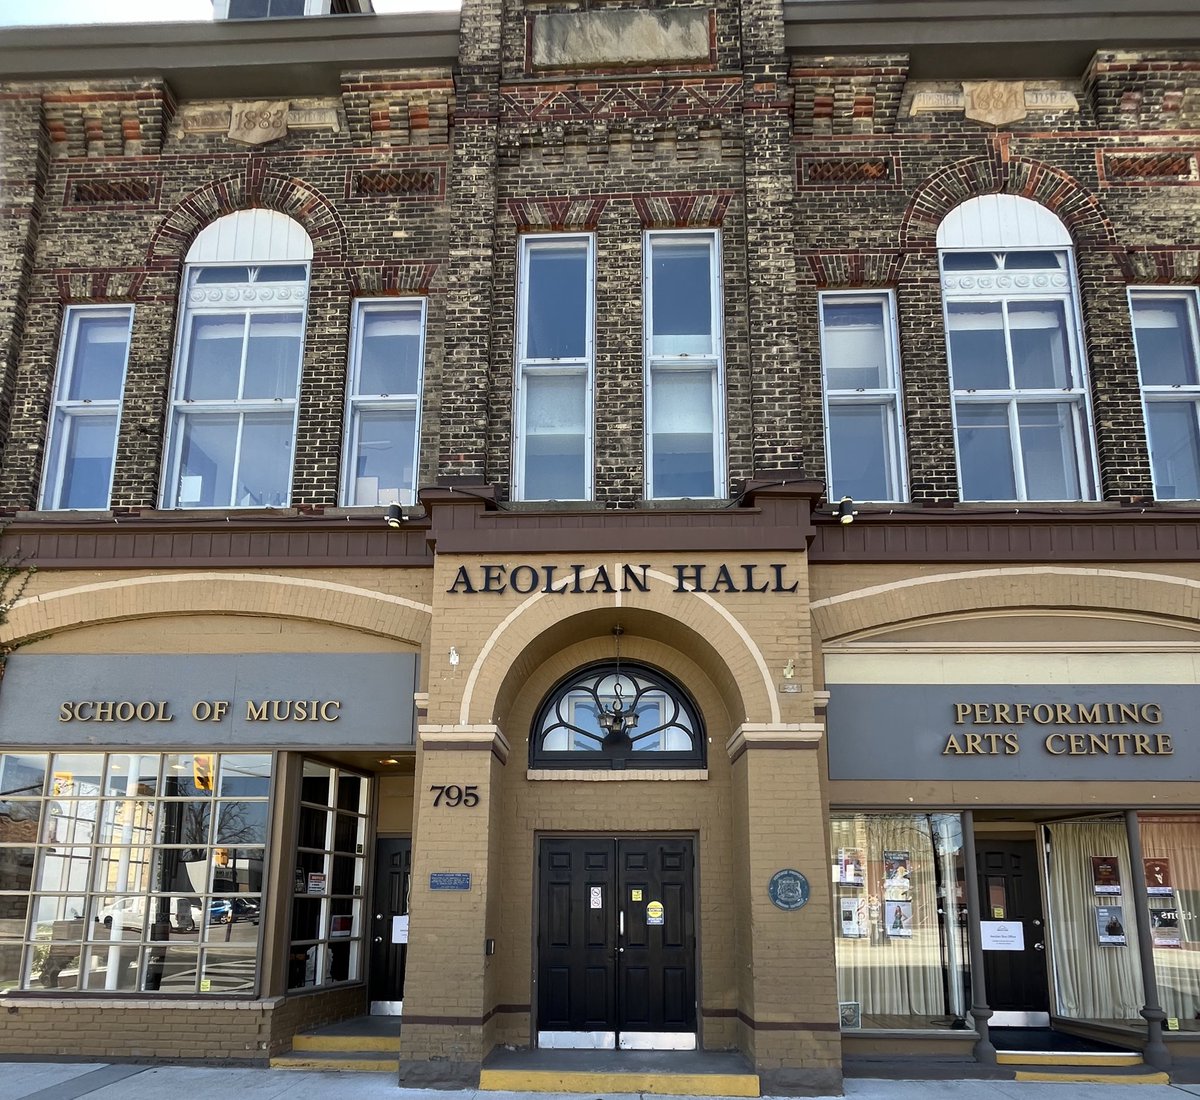 The @AeolianHall has an incredible history and continues to make valuable contributions to arts and culture in London. It was a pleasure to visit again and listen to what they’re working on for the coming months. Thank you, Clark, and the whole team for the work you do. #ldnont